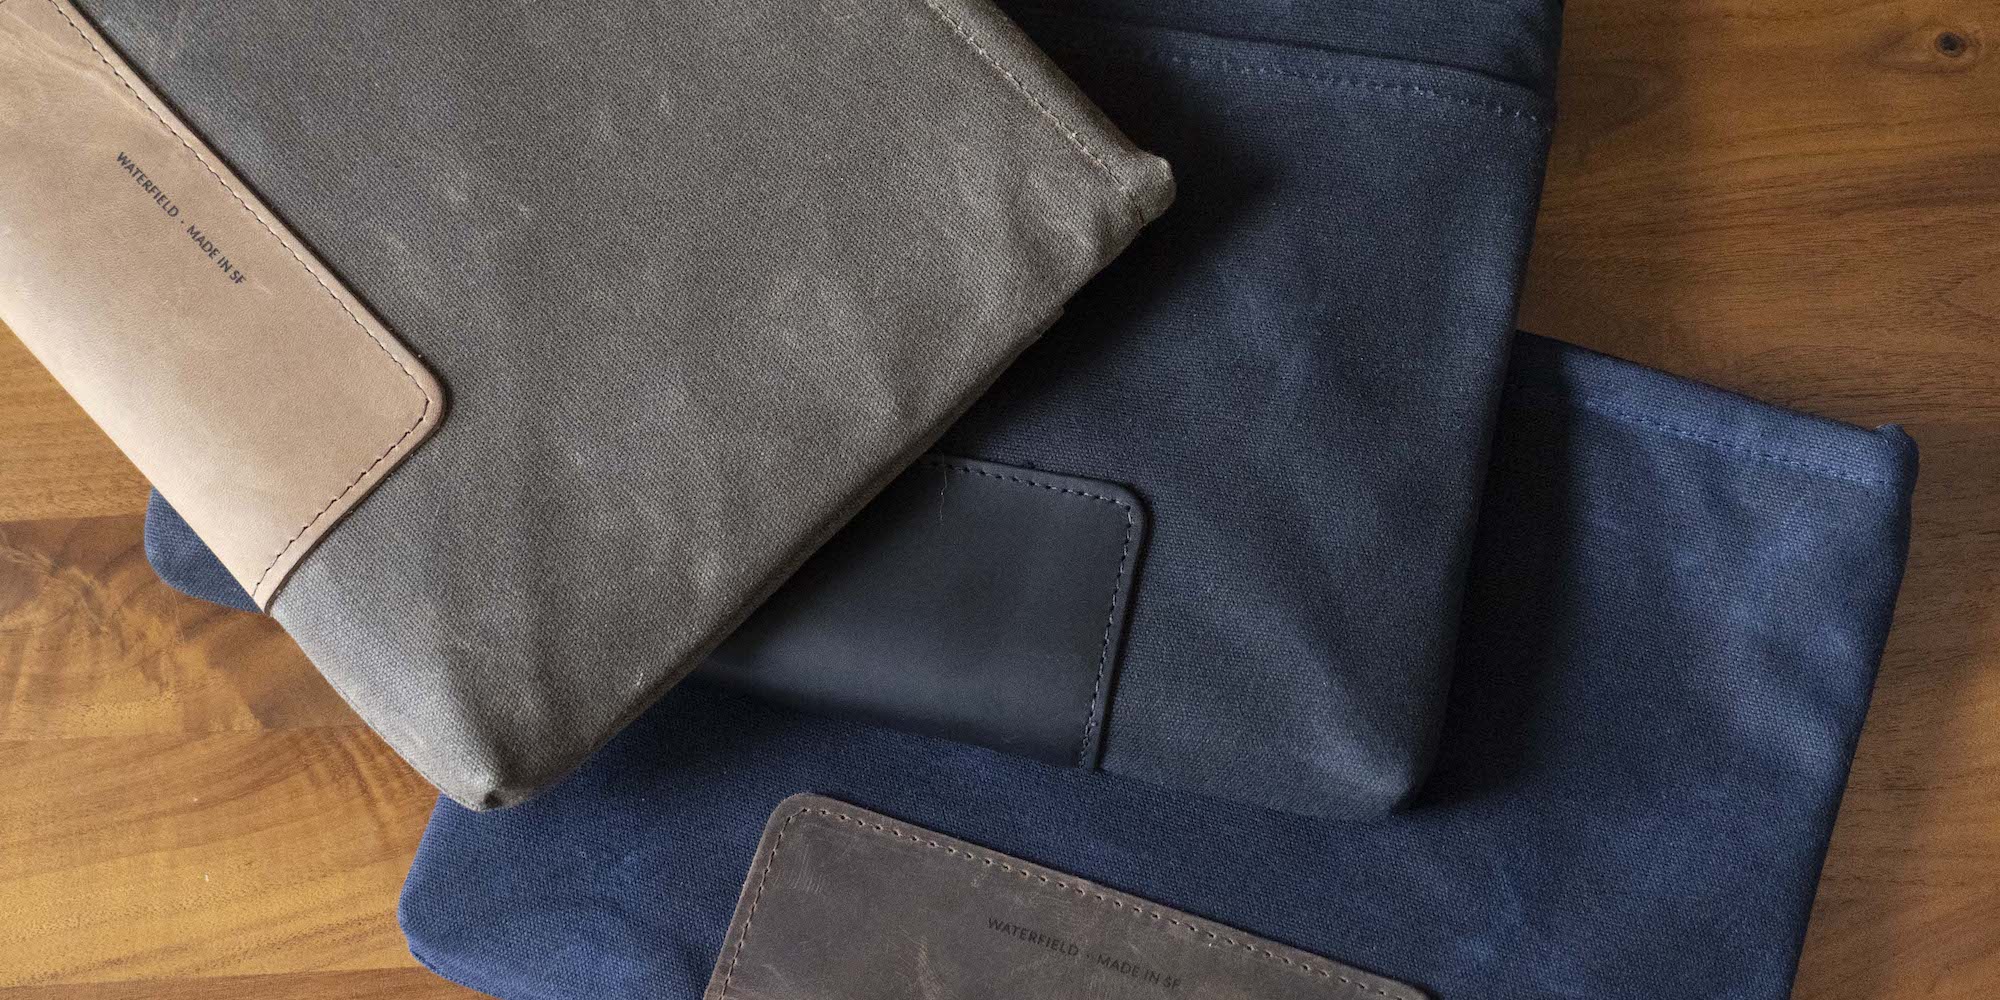 New M2 MacBook Air sleeve from WaterField is here9to5Toys